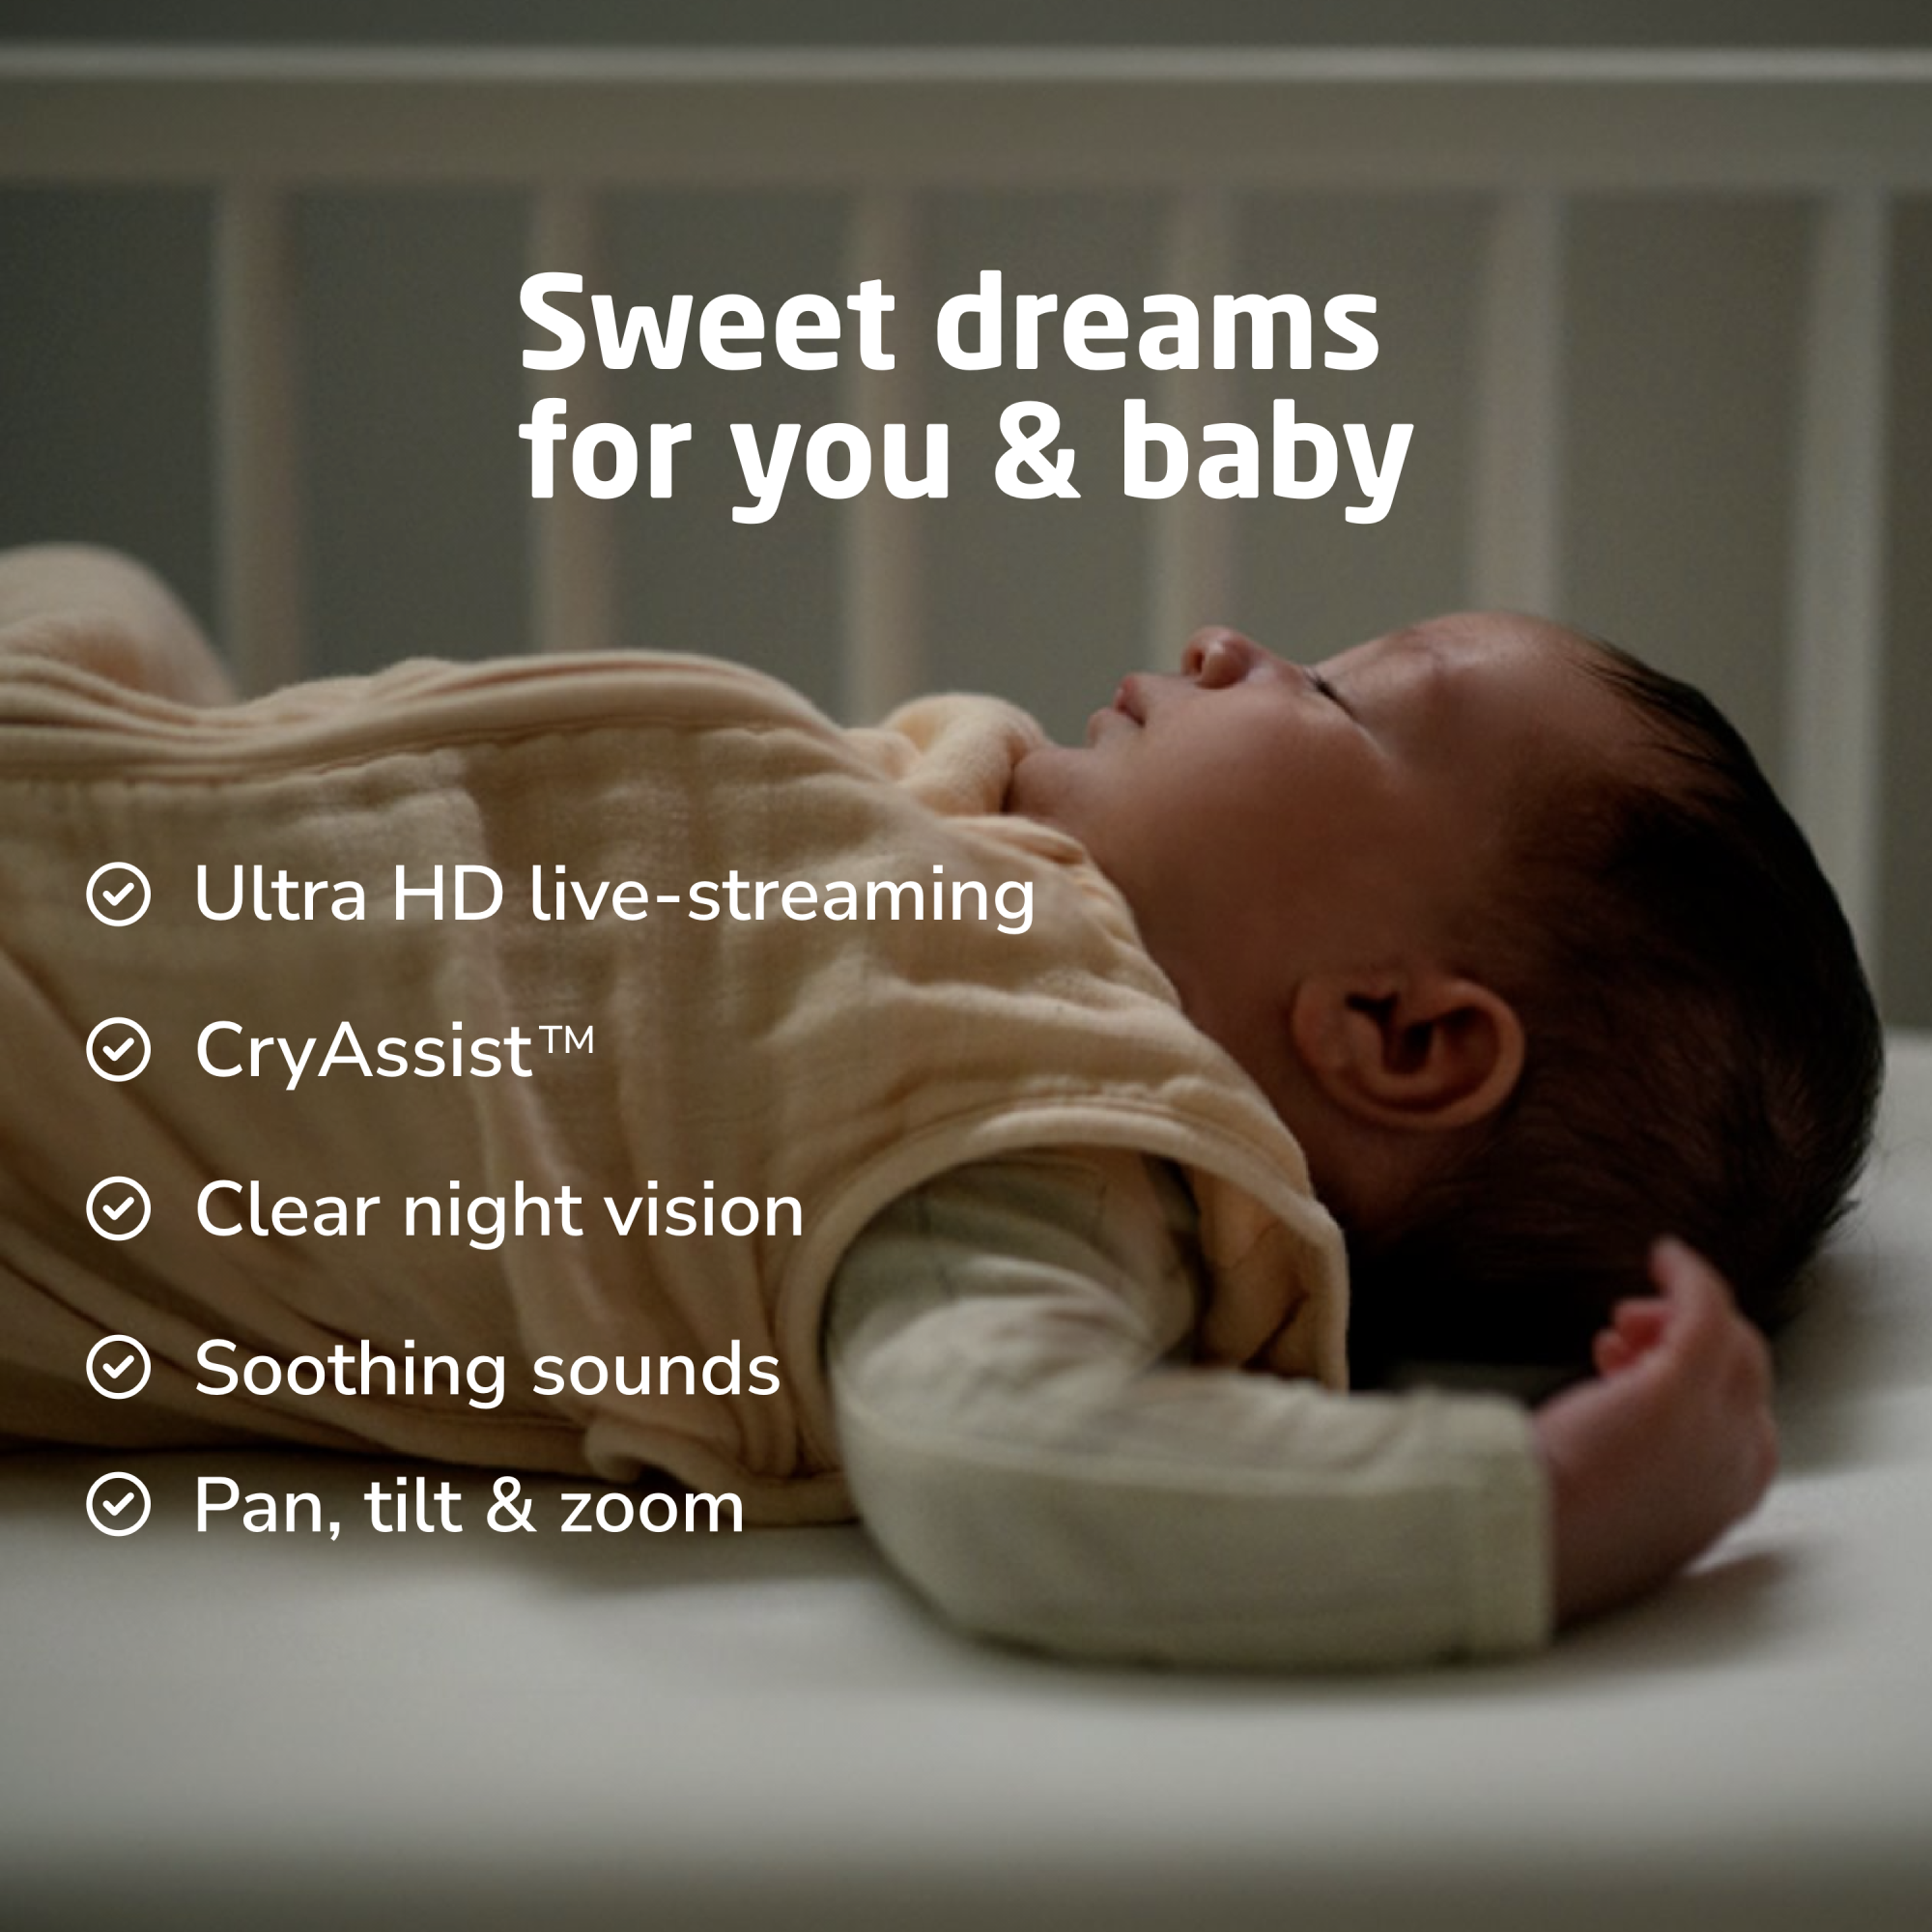 See Pro 360° Baby Monitor - sweet dreams for you & baby - ultra HD live-streaming, CryAssist, Clear night vision, Soothing sounds, Pan tilt & zoom